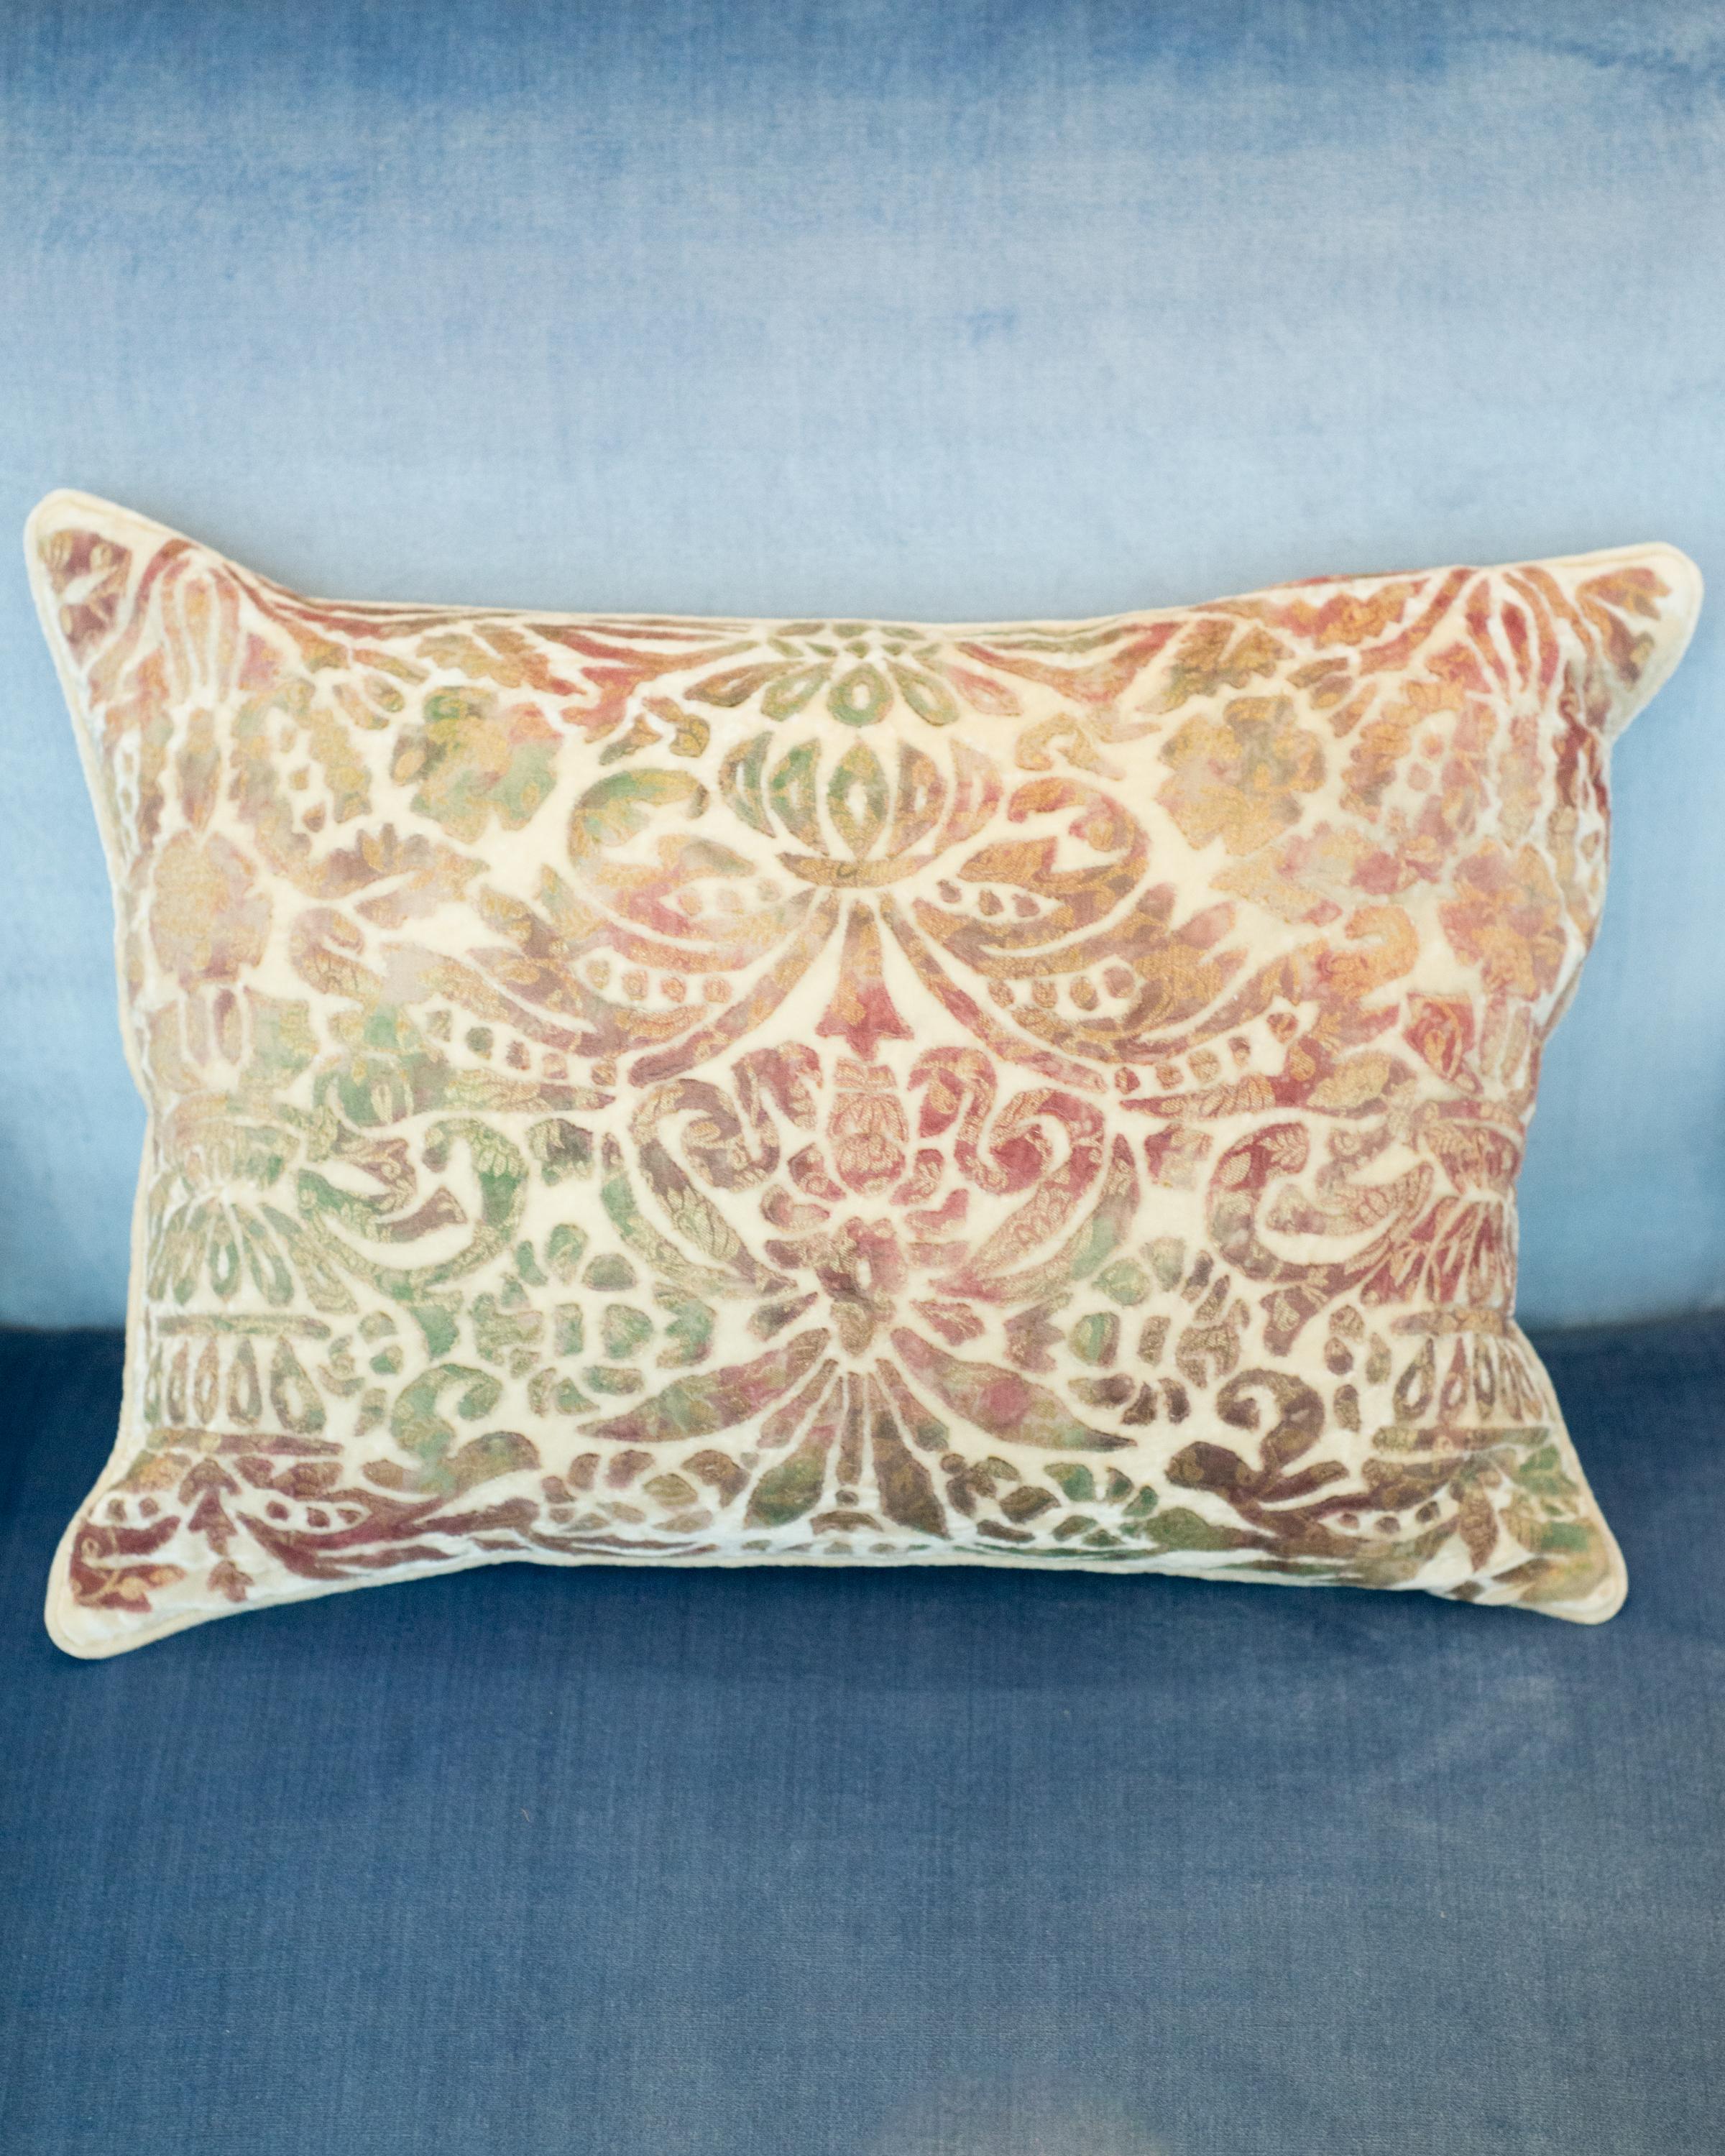 A creme silk velvet floral-embroidered cushion from Anke Dreschel featuring devoré details in multicolour, rectangle shape, and concealed rear zip fastening. Filled with 100% Canadian feather and down.